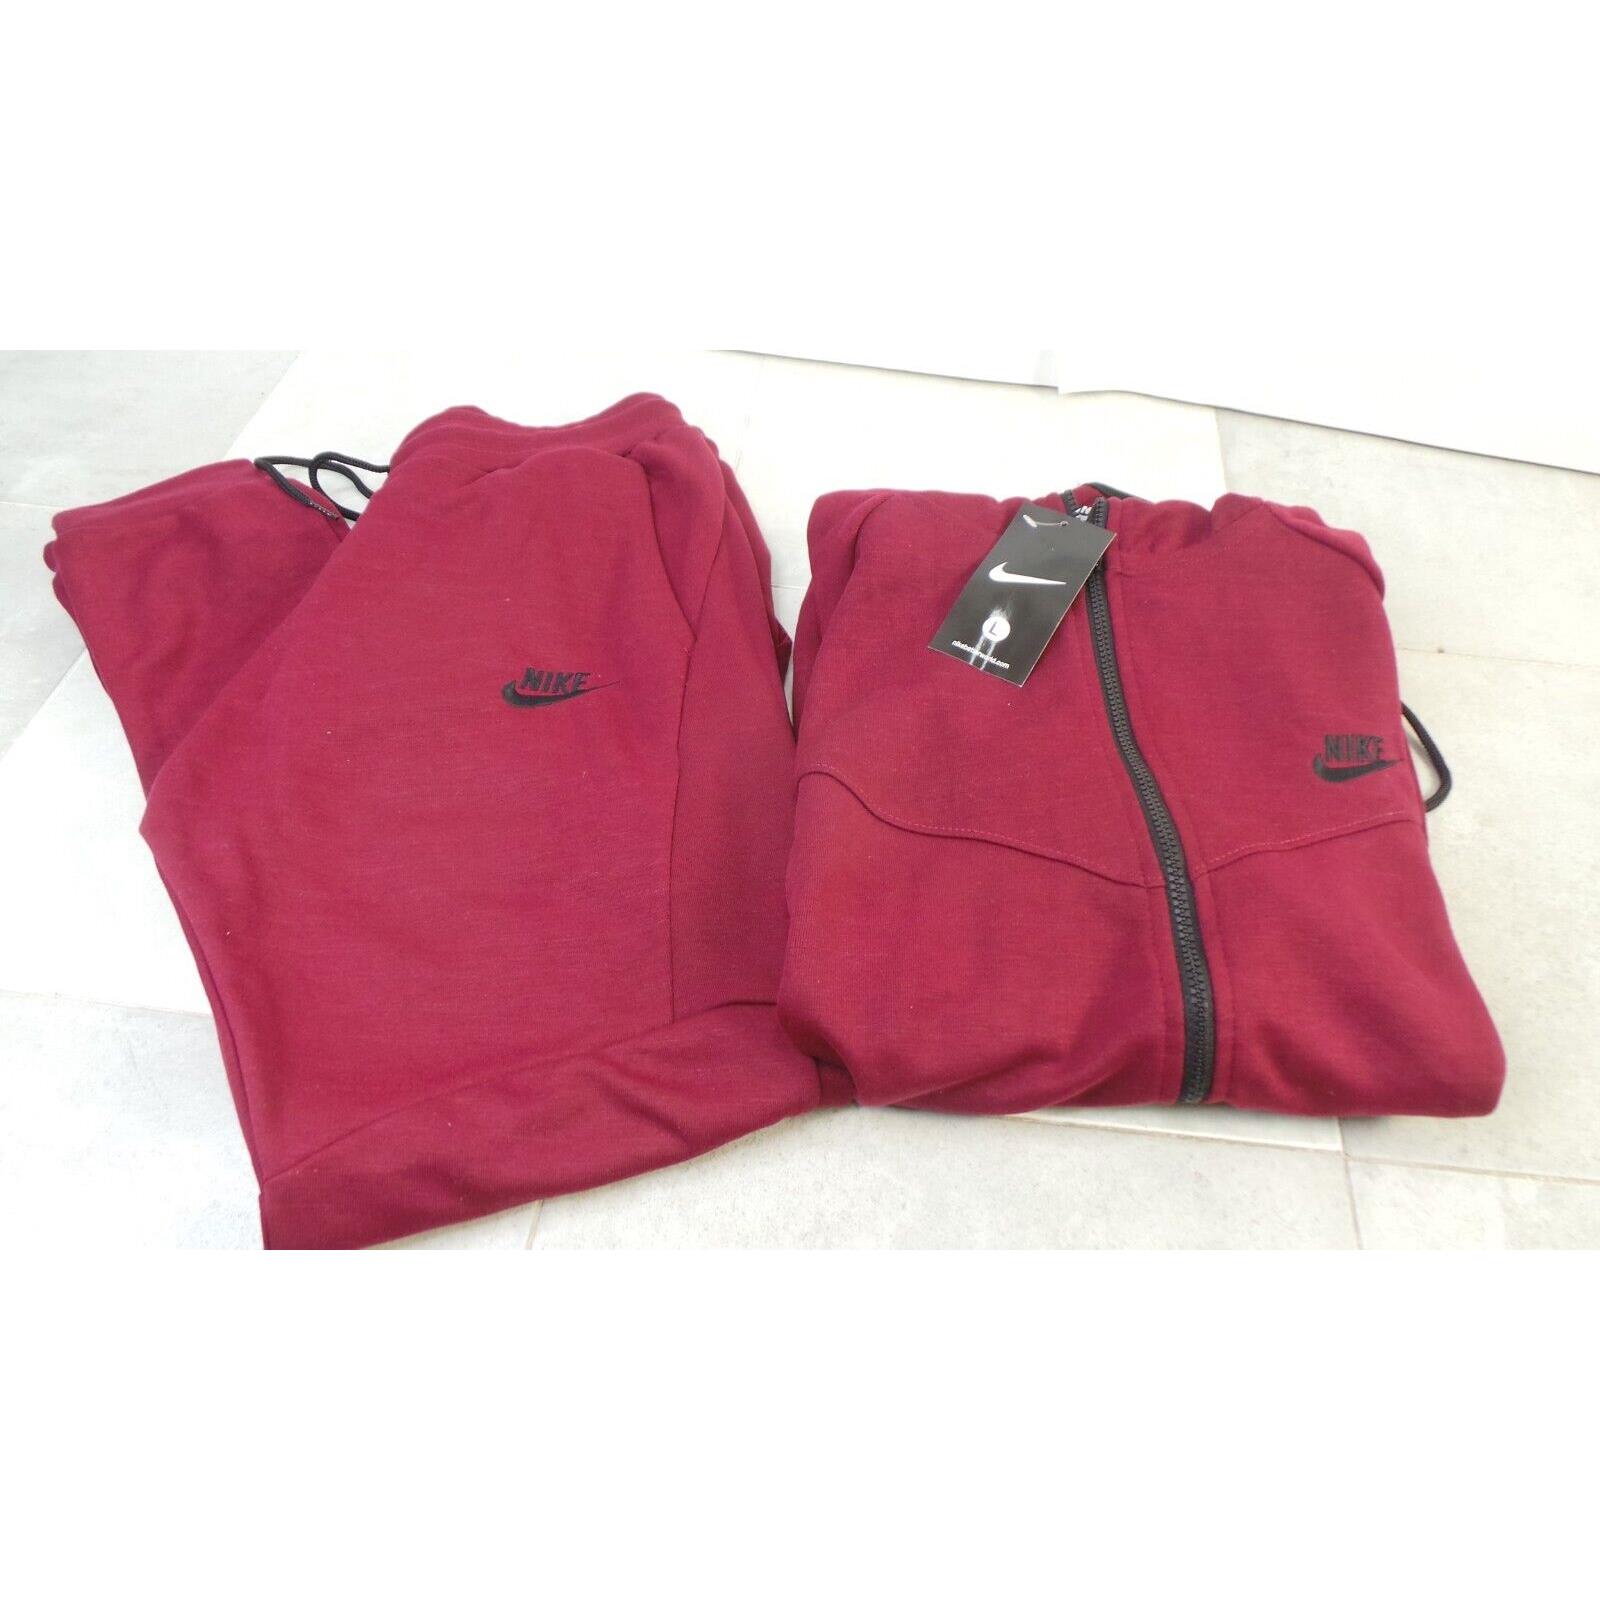 Nike Sweat Suit Size Large Style No 724402 G120698-1 ER BY-8D